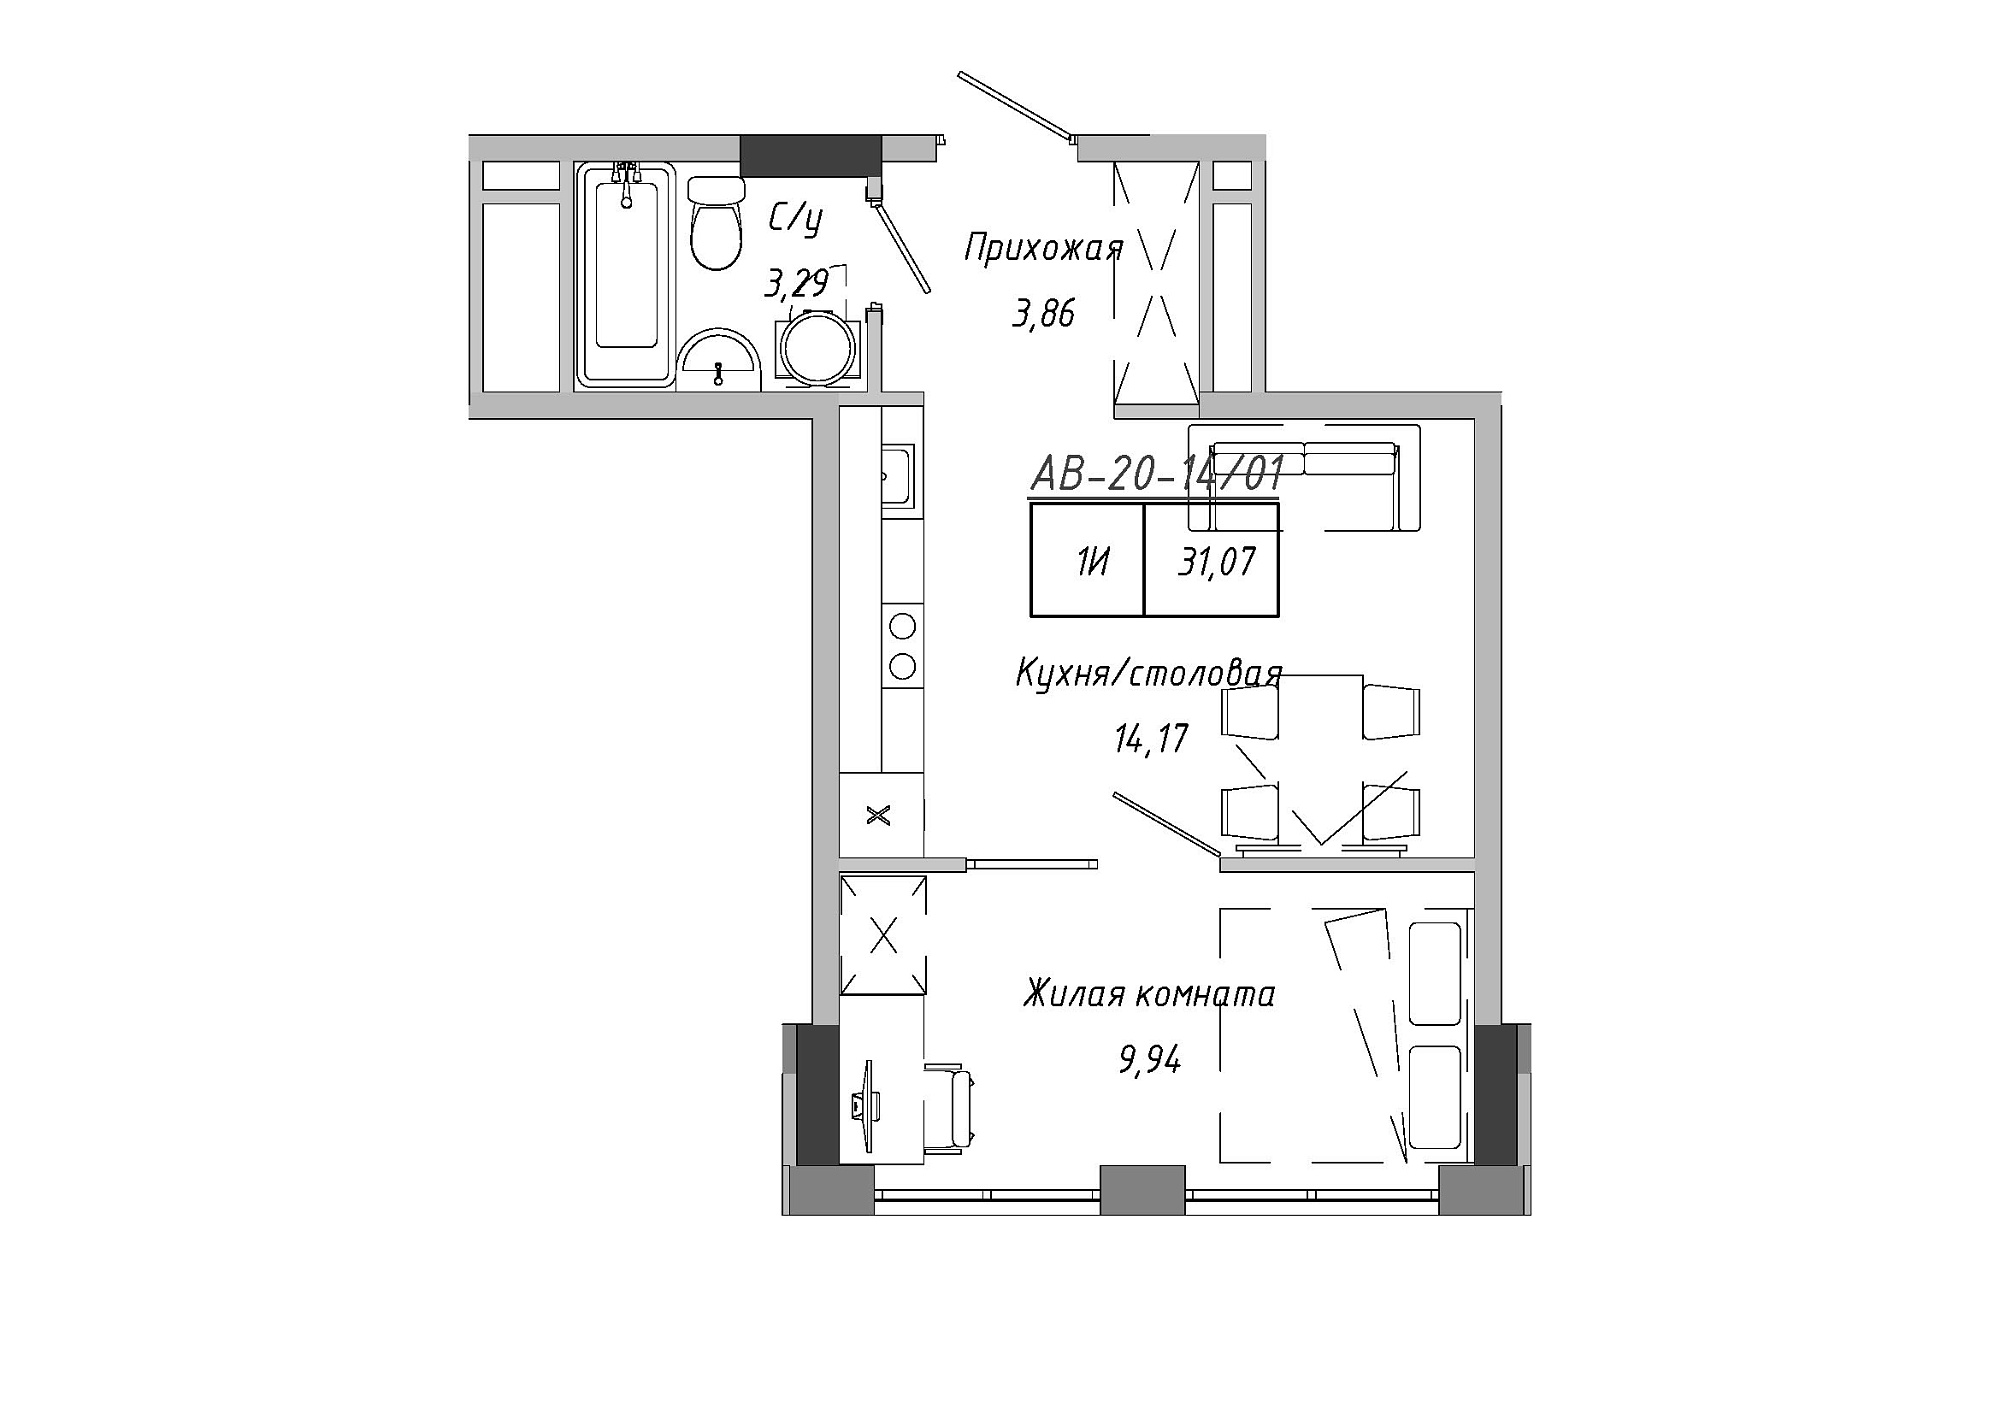 Planning 1-rm flats area 31.07m2, AB-20-14/00101.